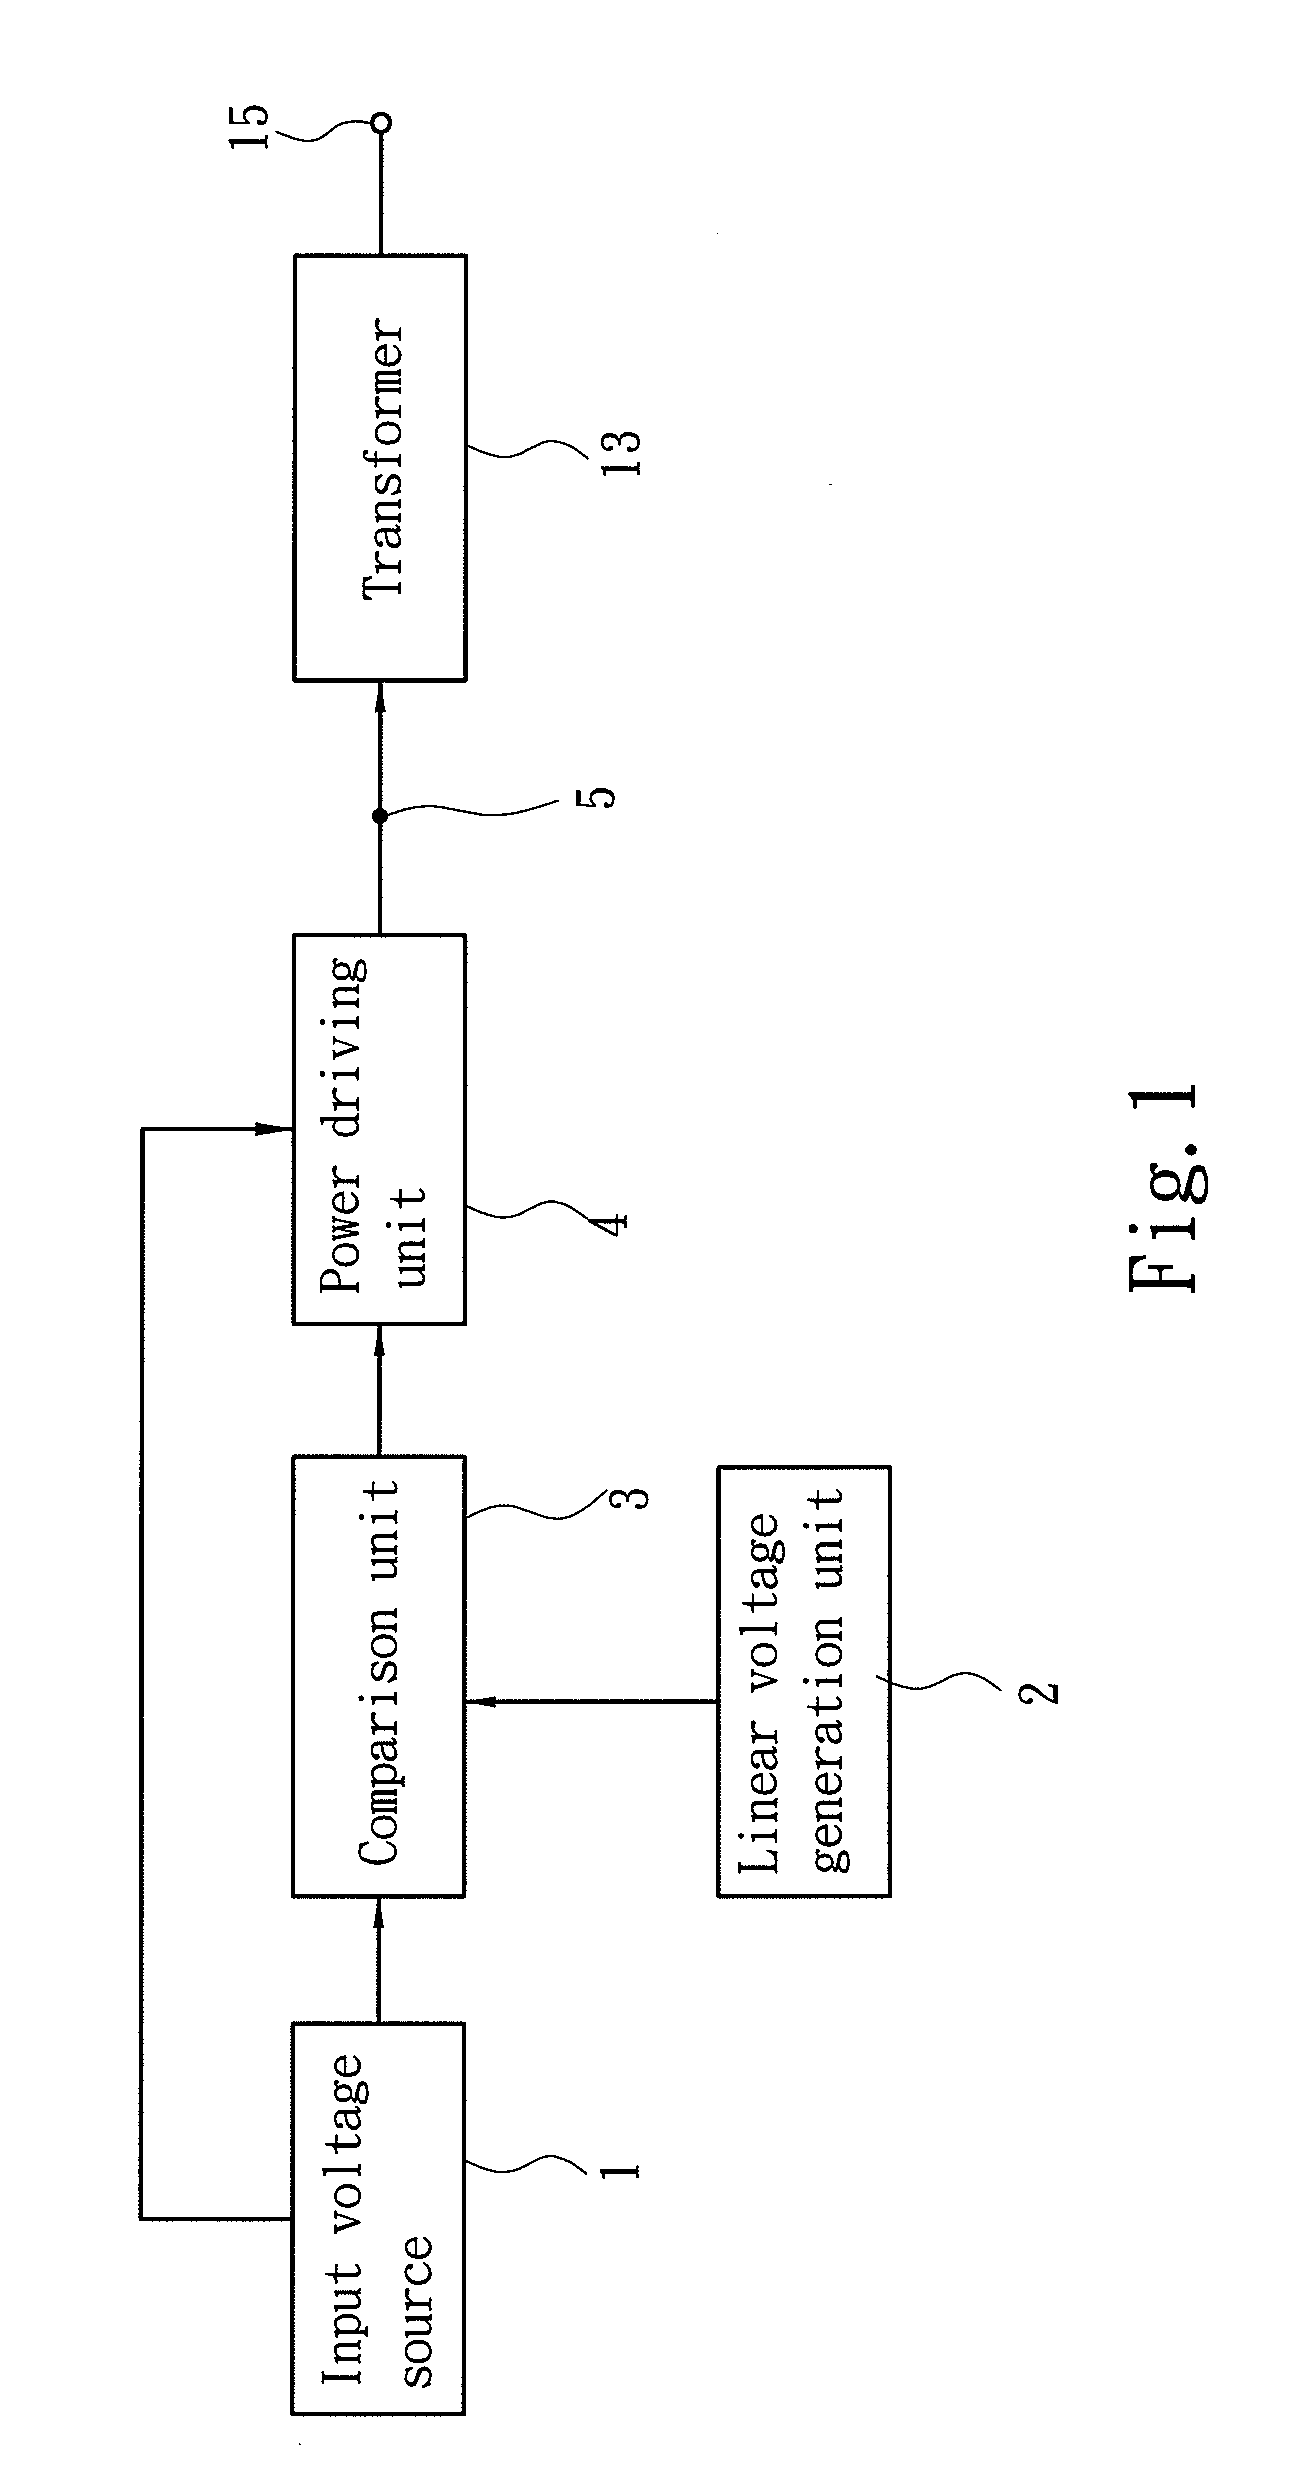 Cycle modulation circuit for limiting peak voltage